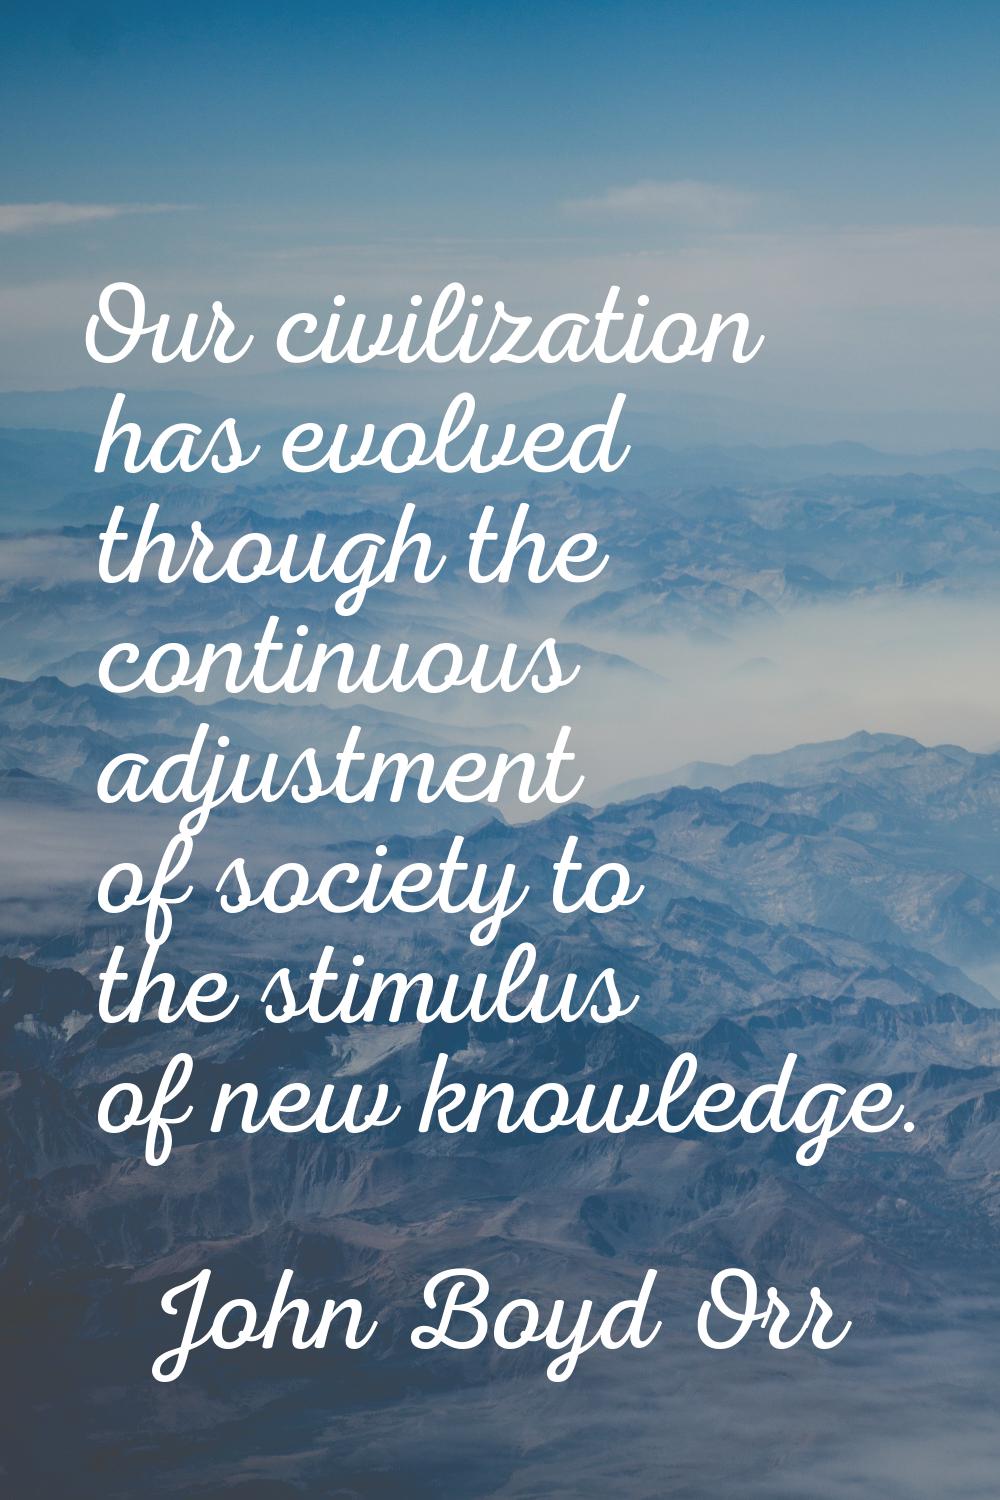 Our civilization has evolved through the continuous adjustment of society to the stimulus of new kn